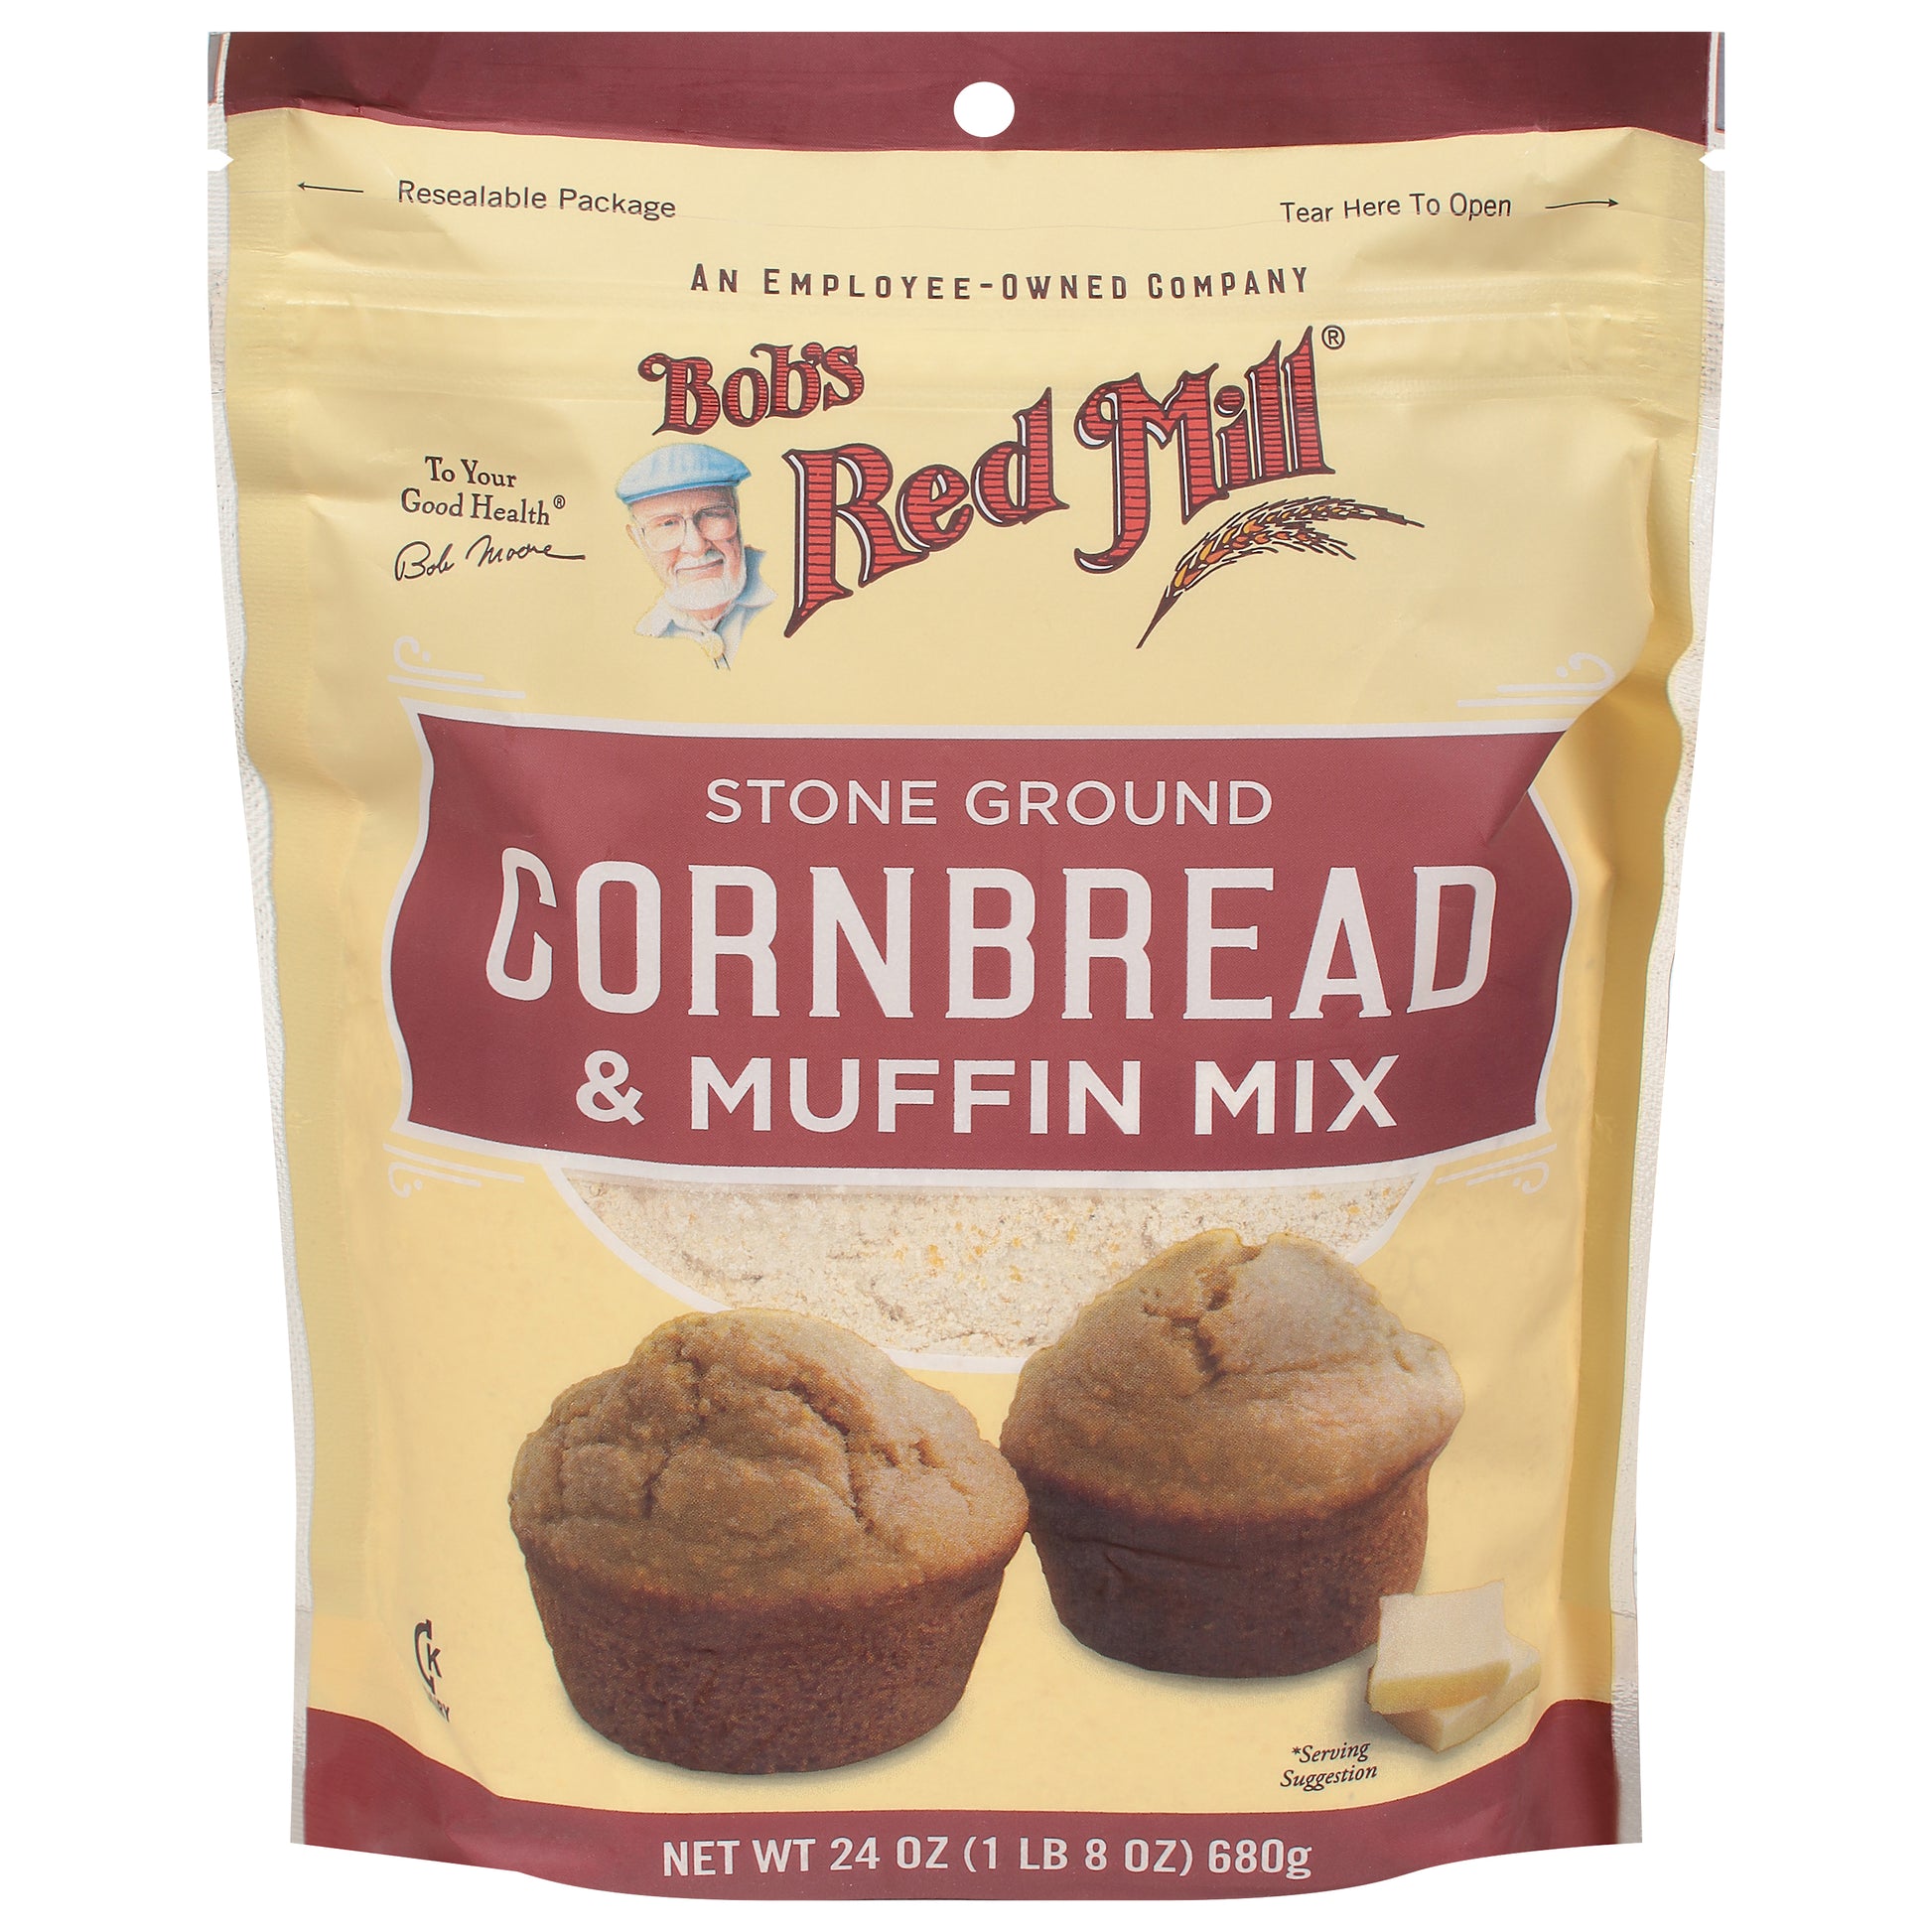 Bobs Red Mill Mix Cornmeal Muffin 24 oz (Pack Of 4)